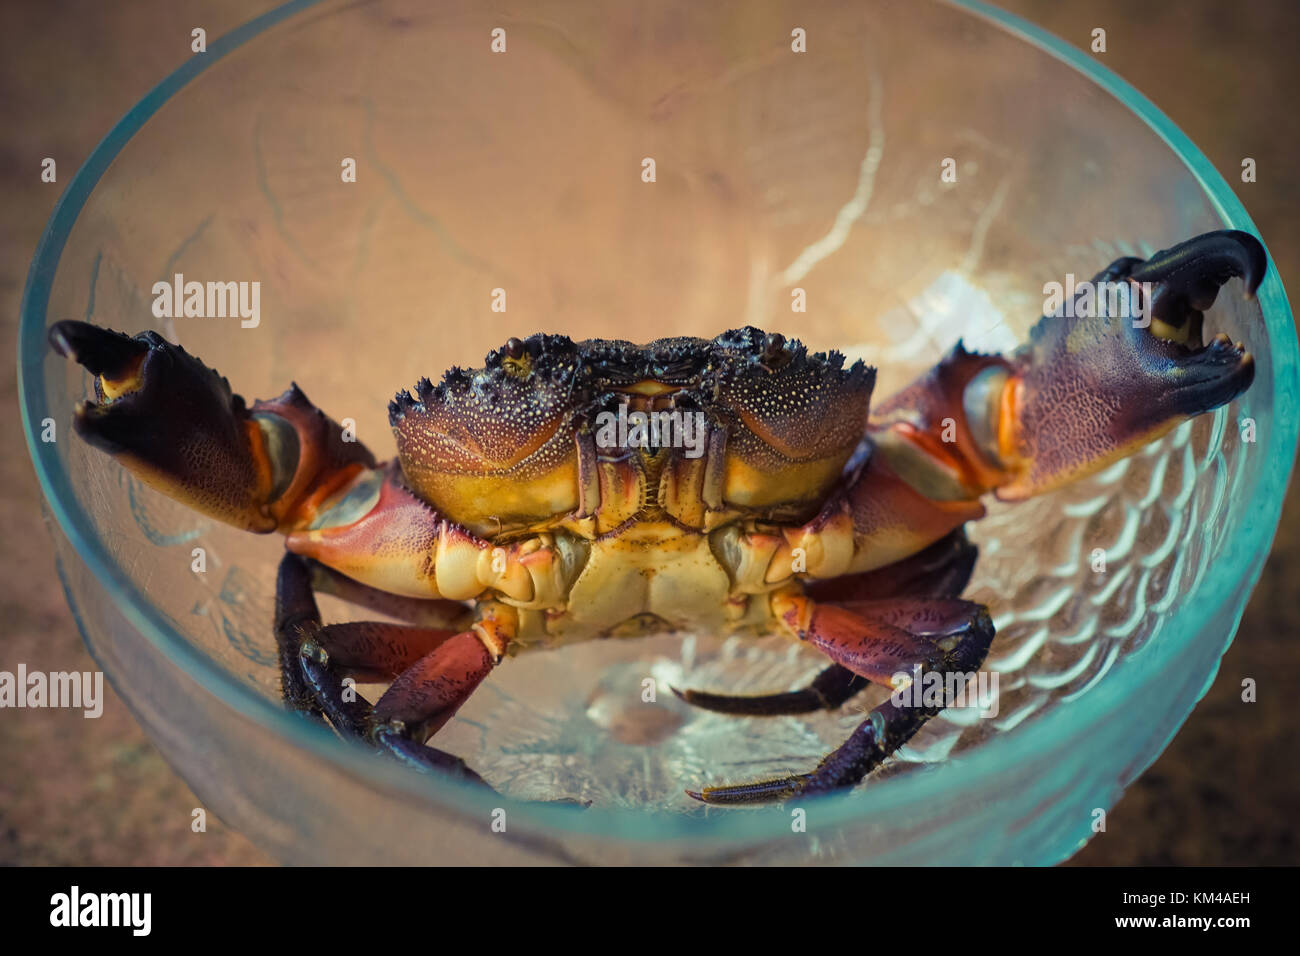 Live crab with outspread claws in a crystal dish Stock Photo